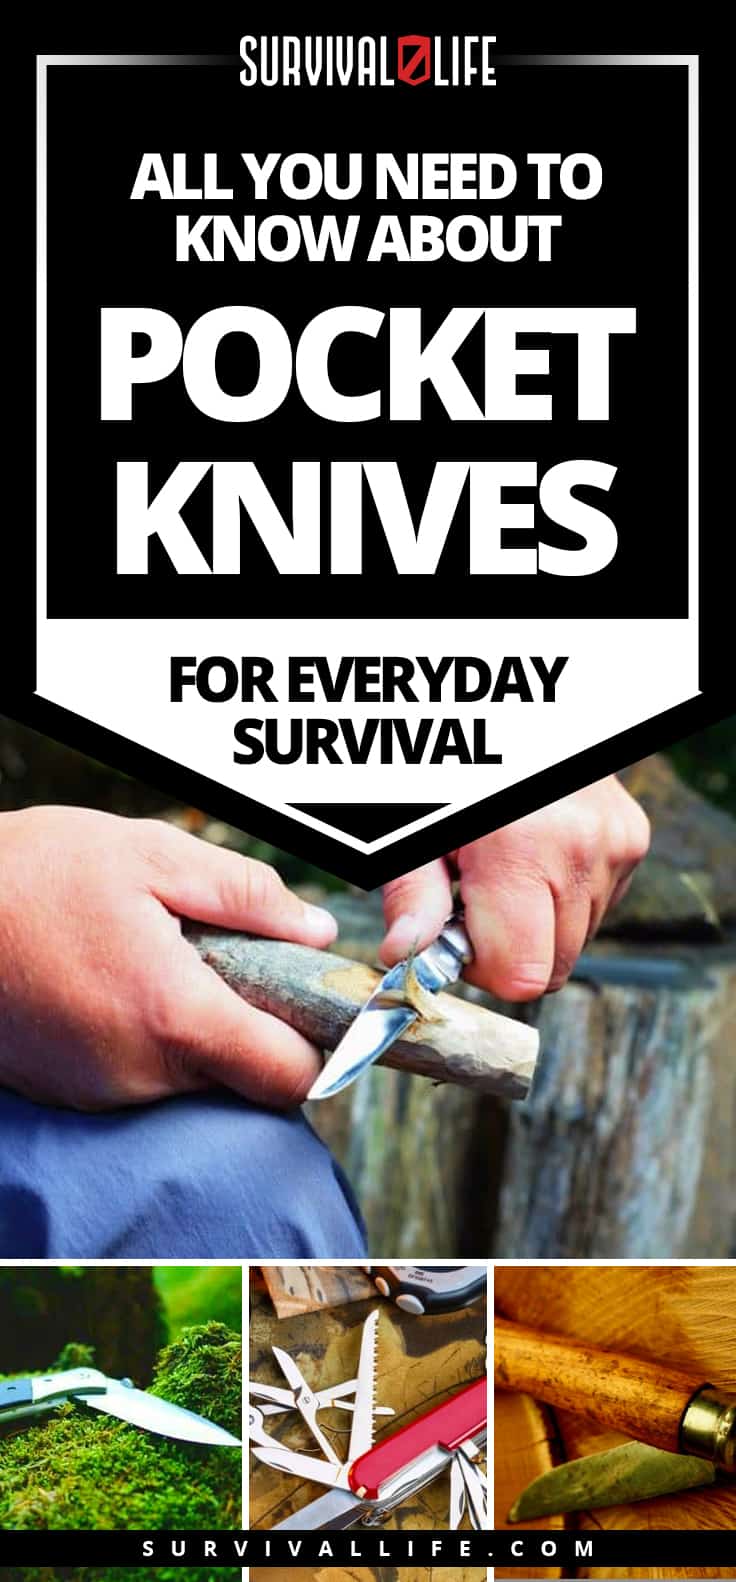 All You Need to Know About Pocket Knives For Everyday Survival